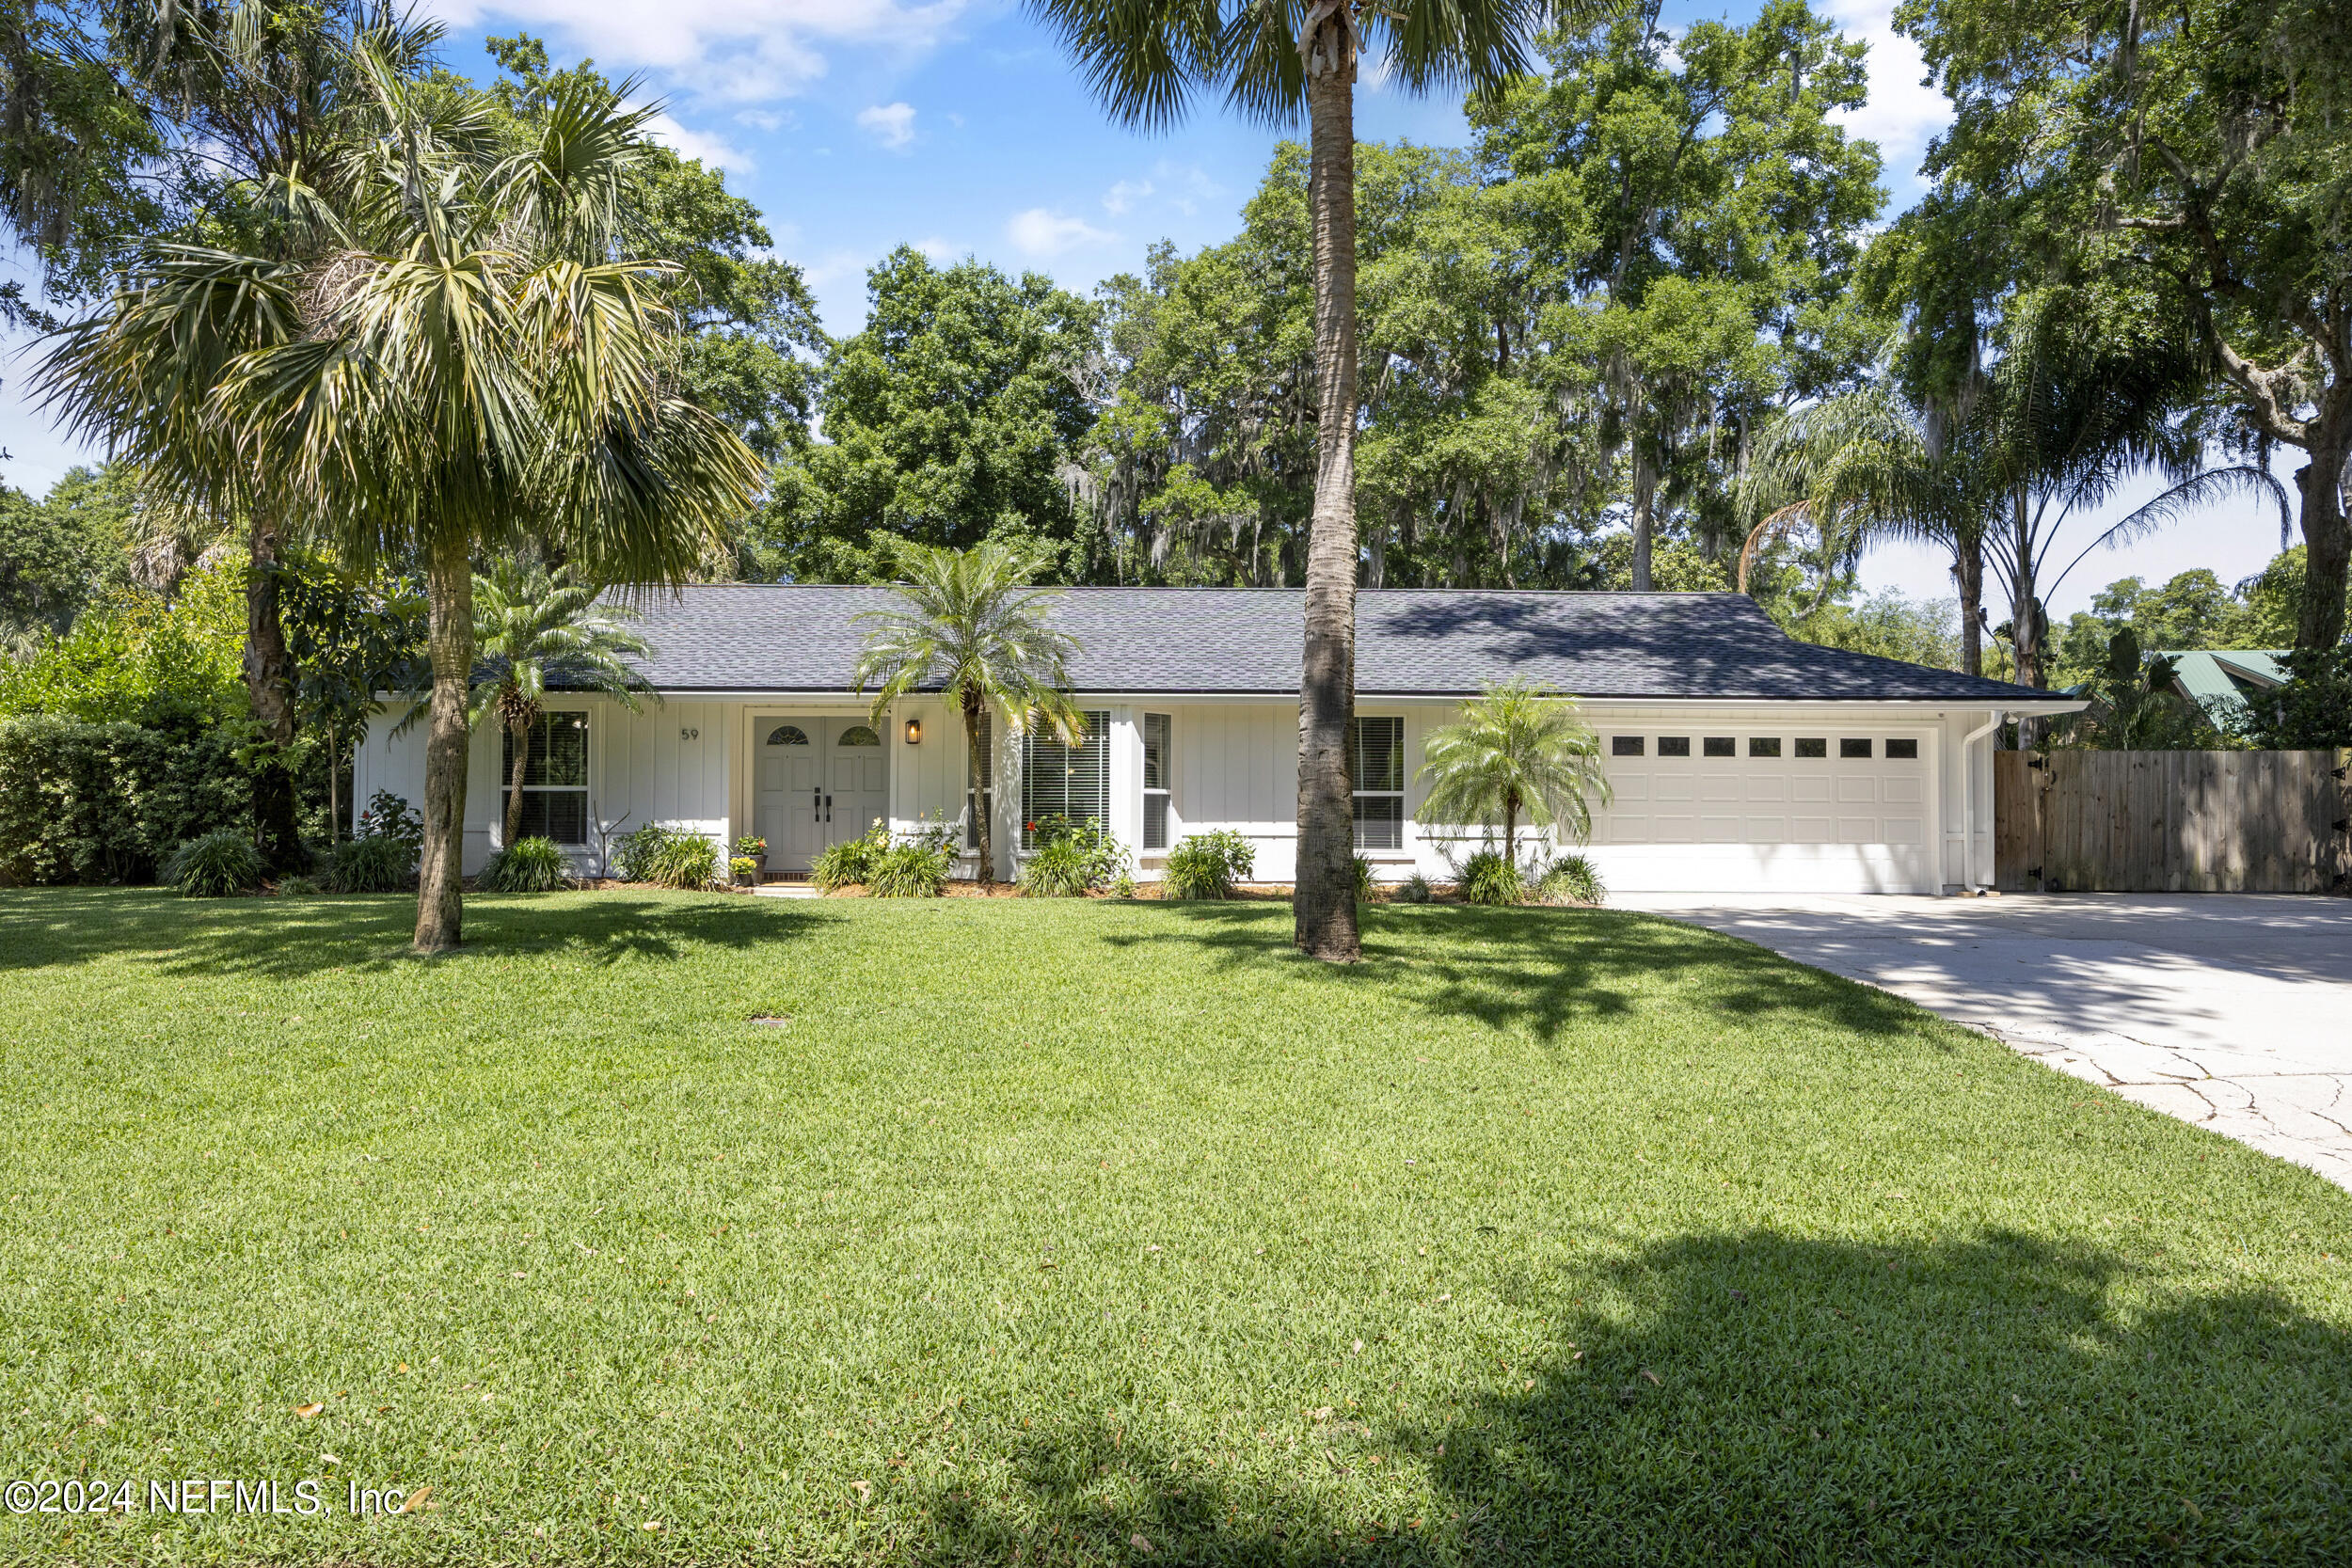 Jacksonville Beach, FL home for sale located at 59 Oakwood Road, Jacksonville Beach, FL 32250